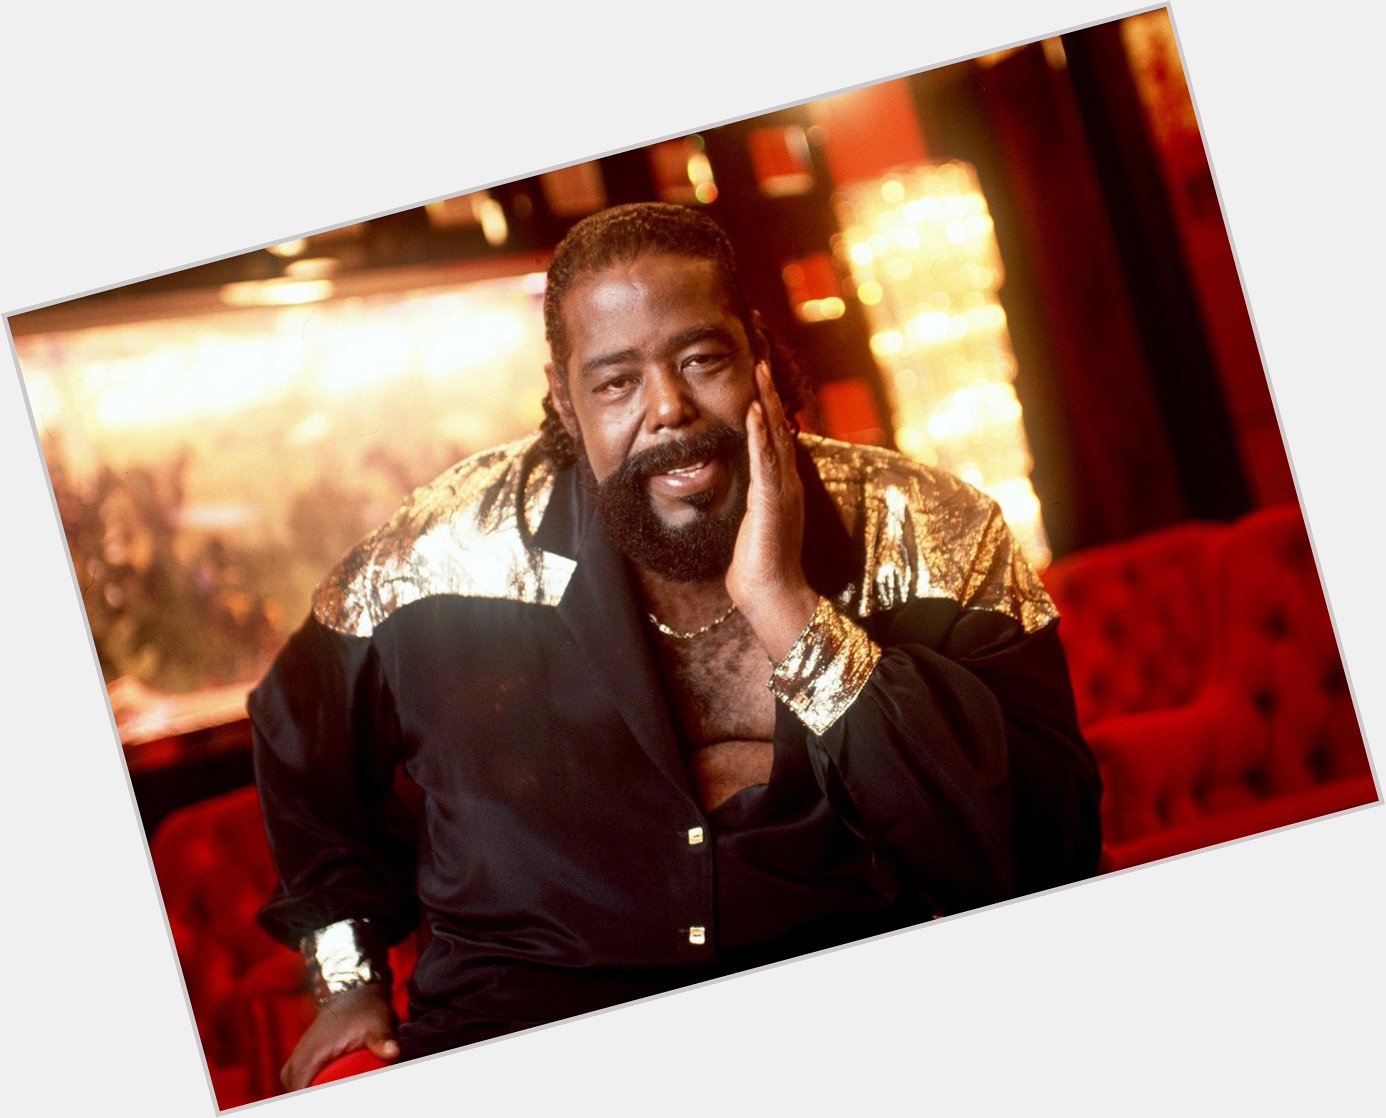 Happy Birthday to Barry White, who would have turned 73 today! 